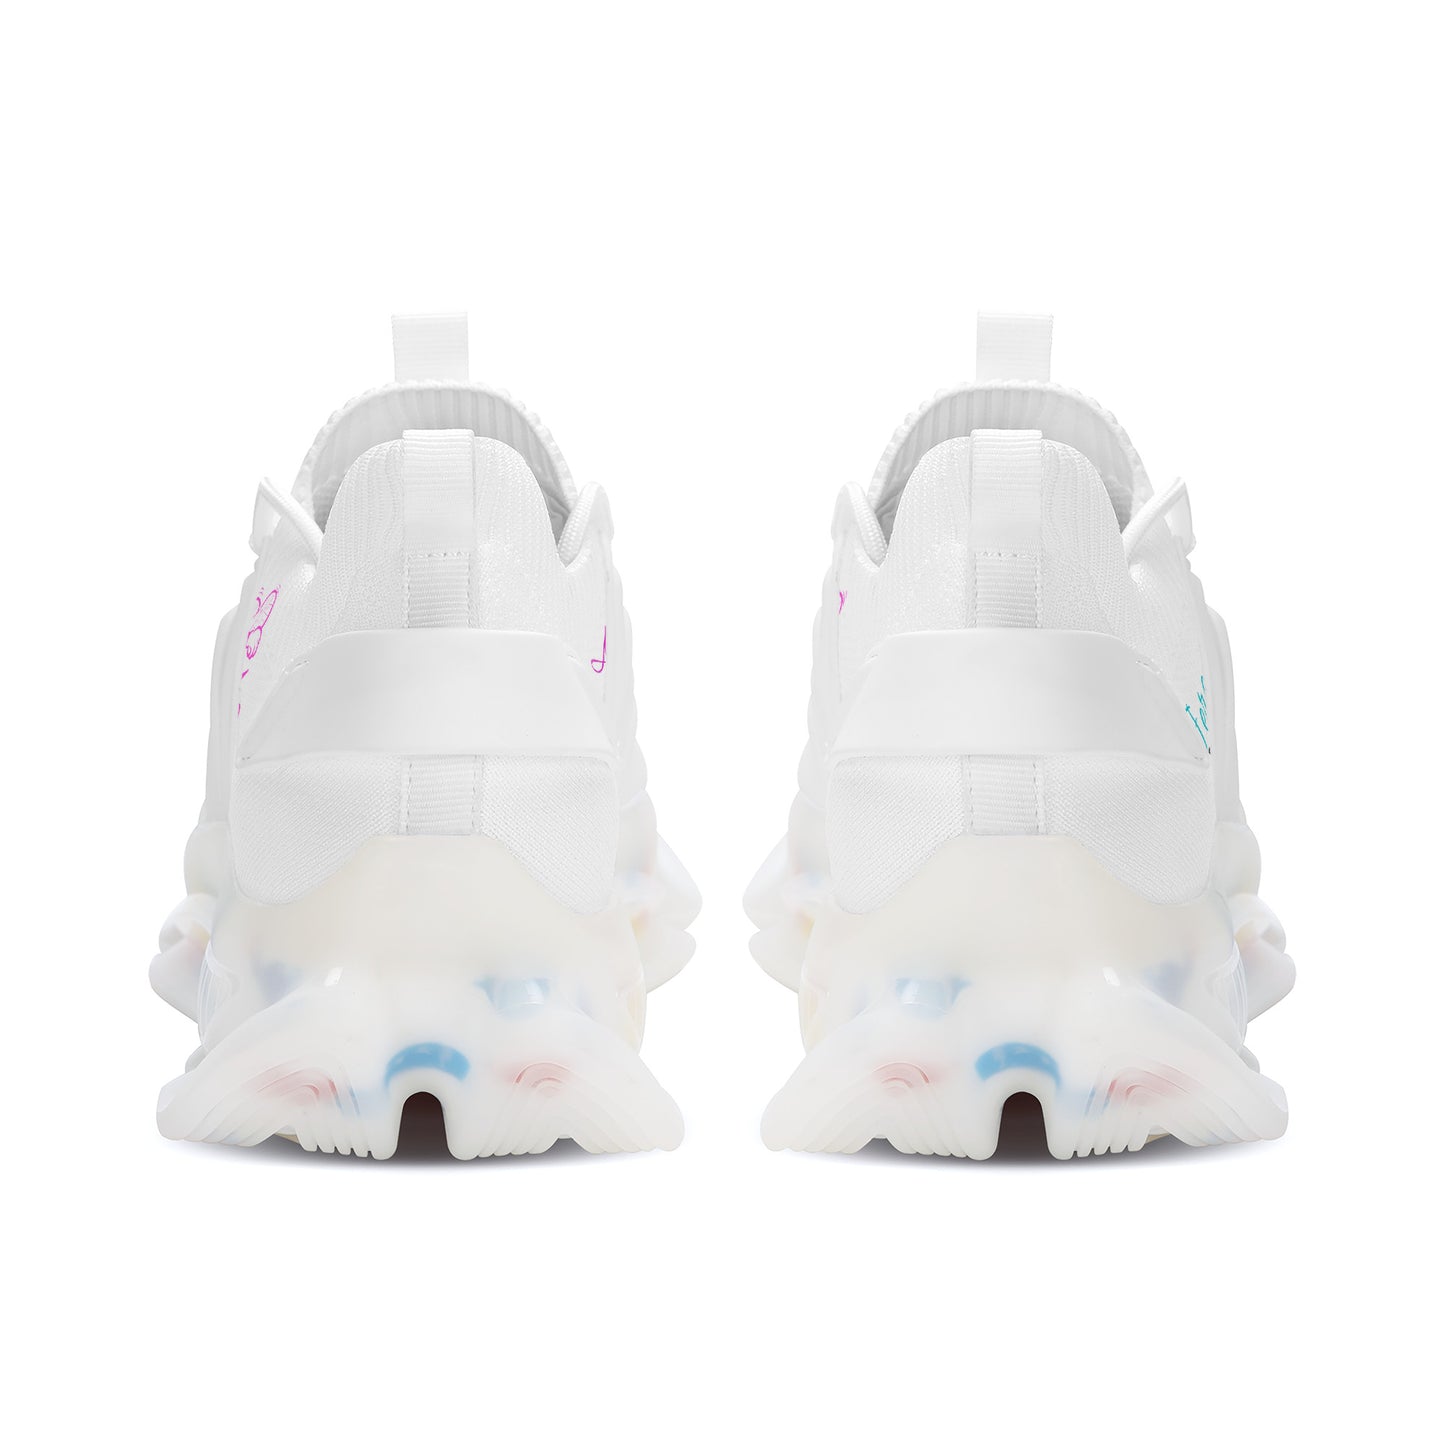 Be Who You Bee with God Air Max React Sneakers - White